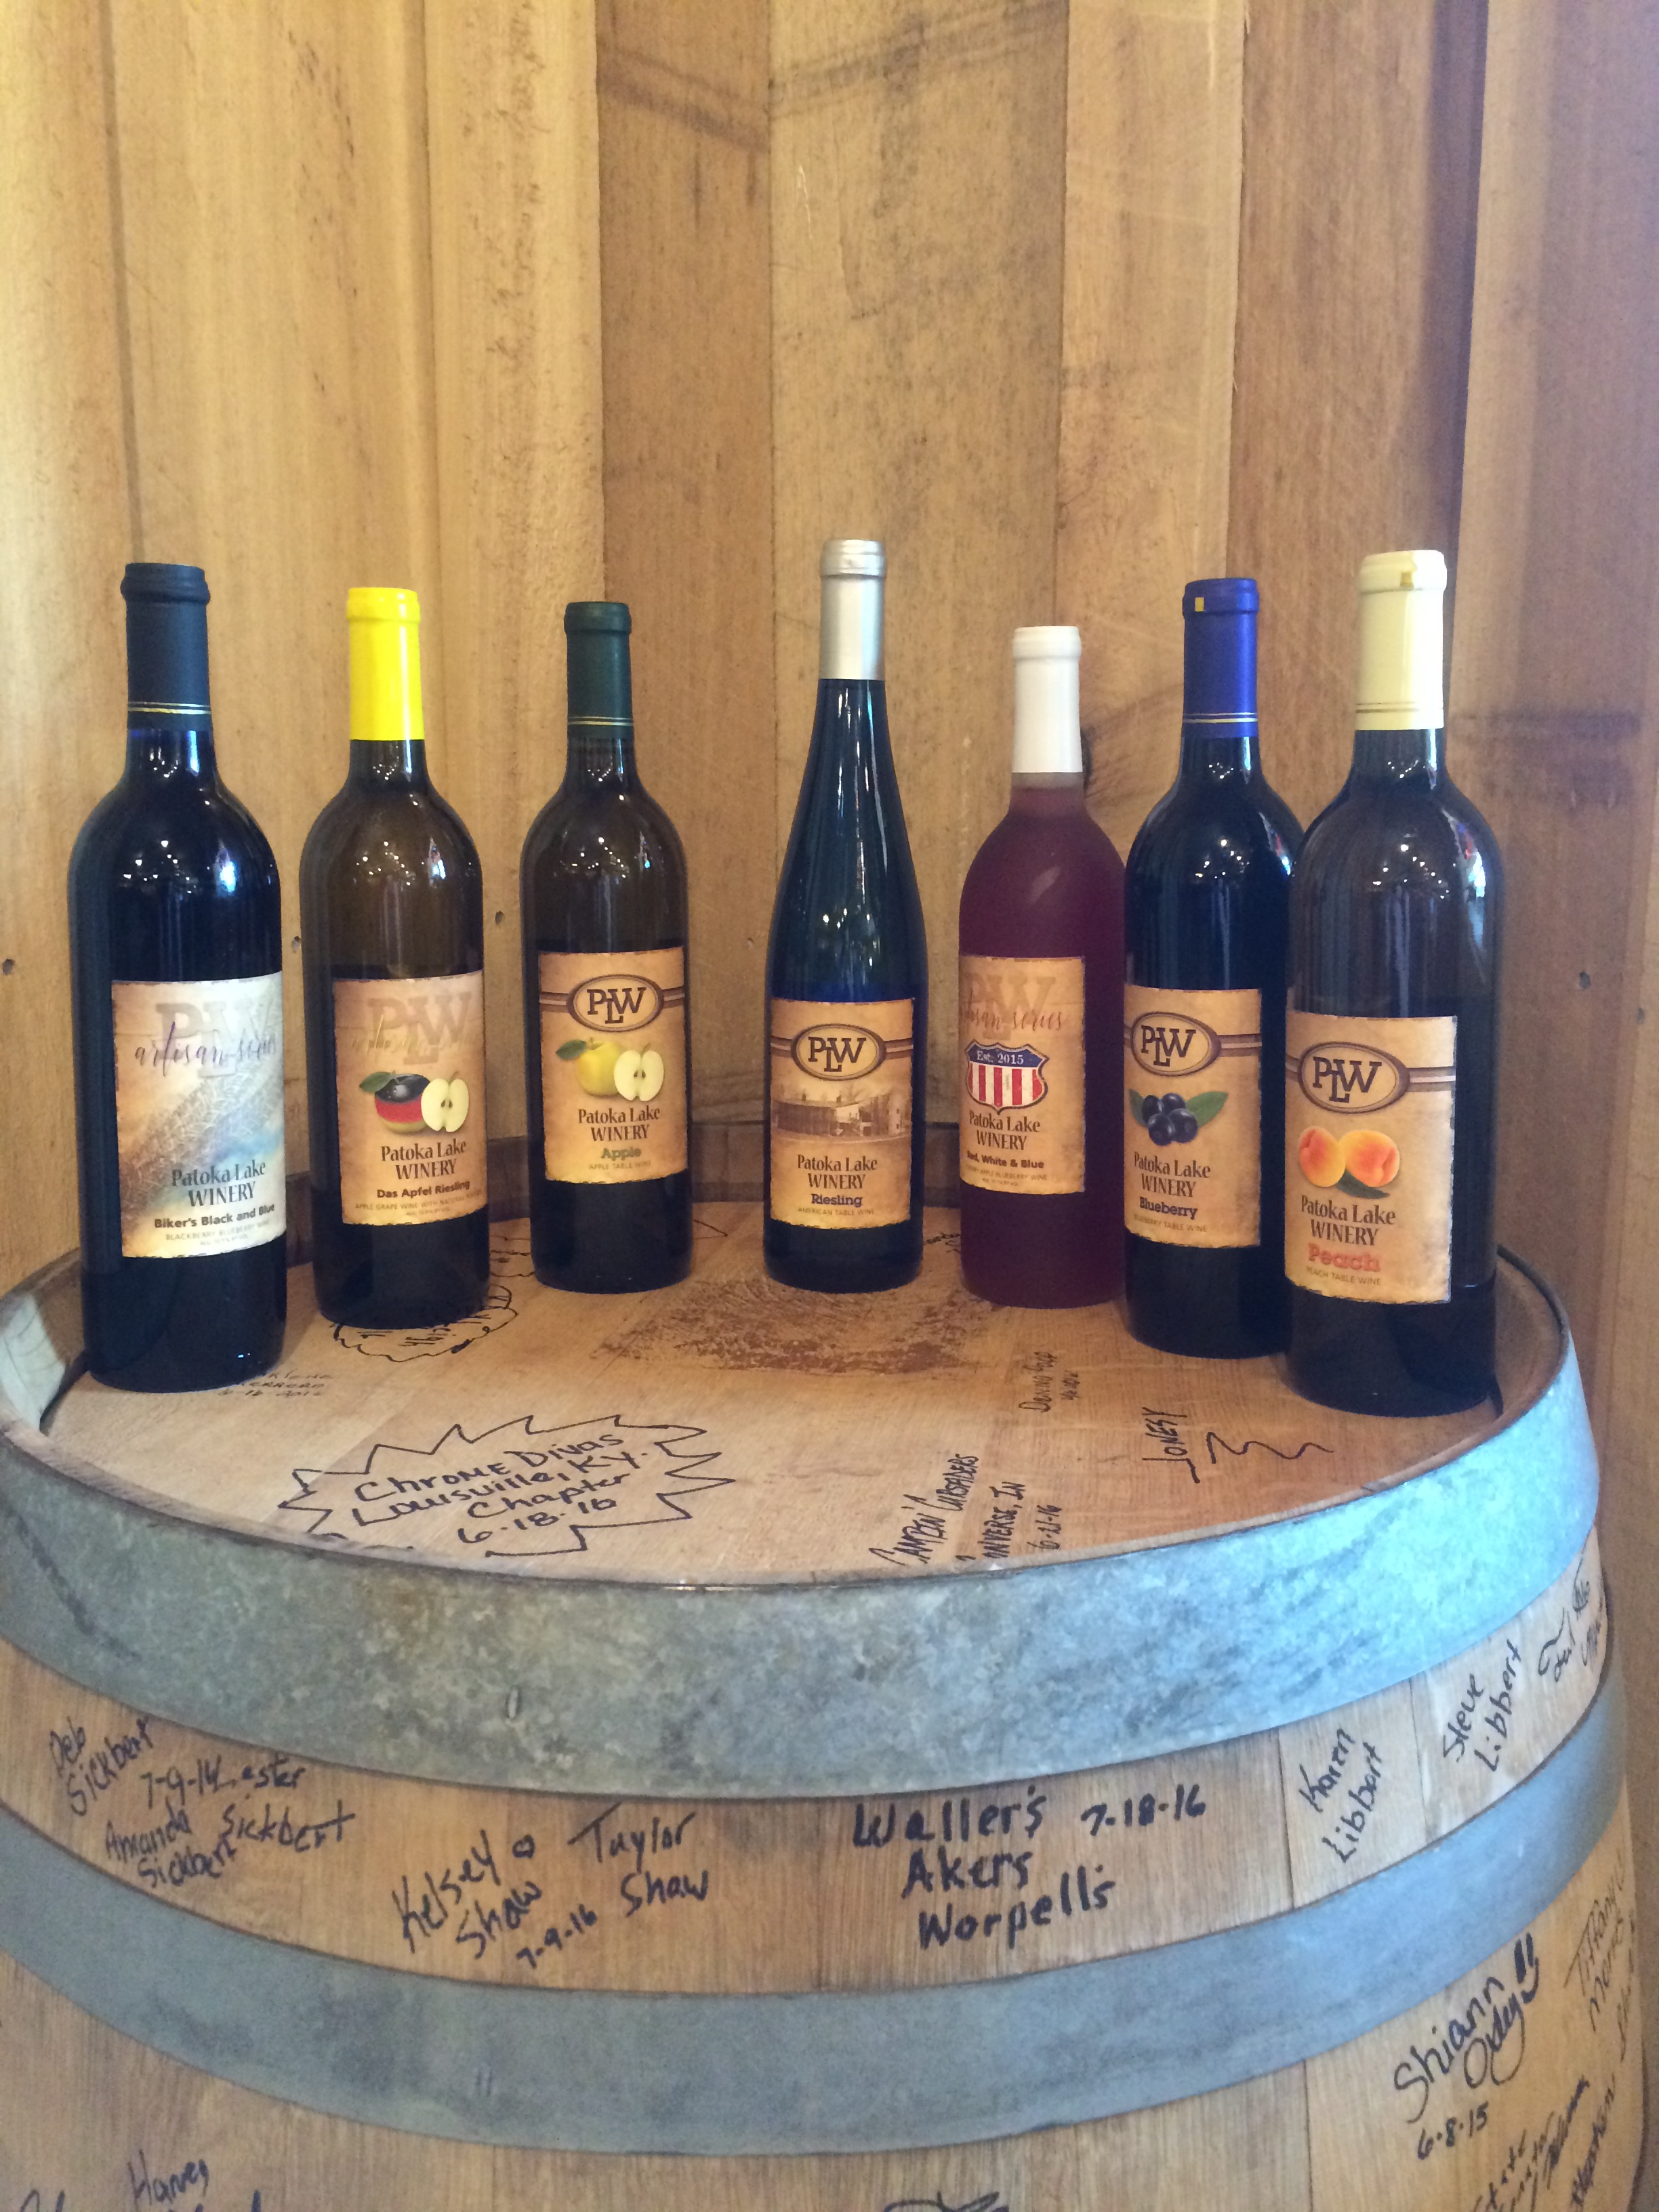 A sampling of our wines